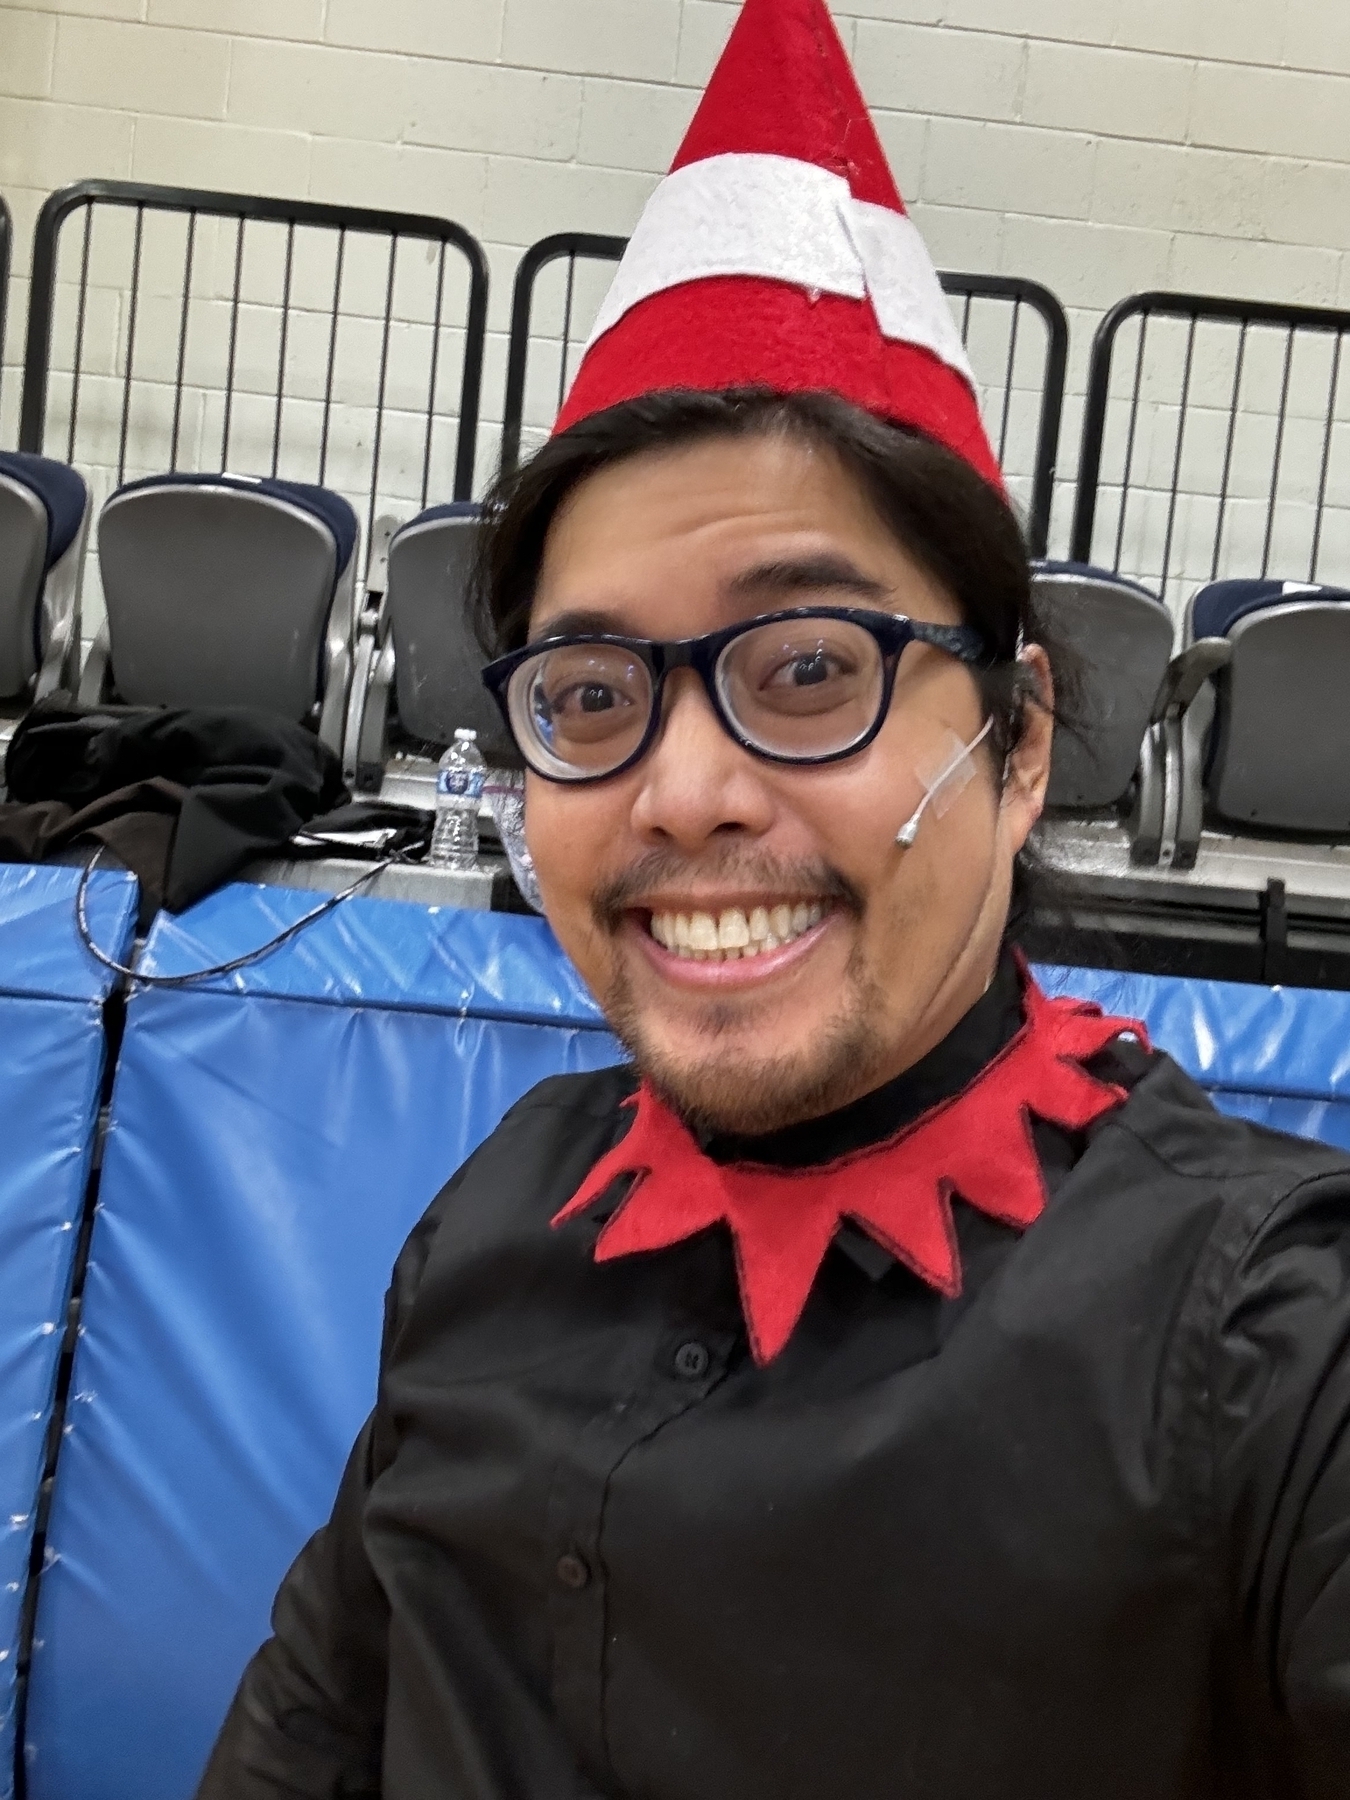 Miguel a masc Filipino man wearing a pointy red elf hat and black shirt and smiling